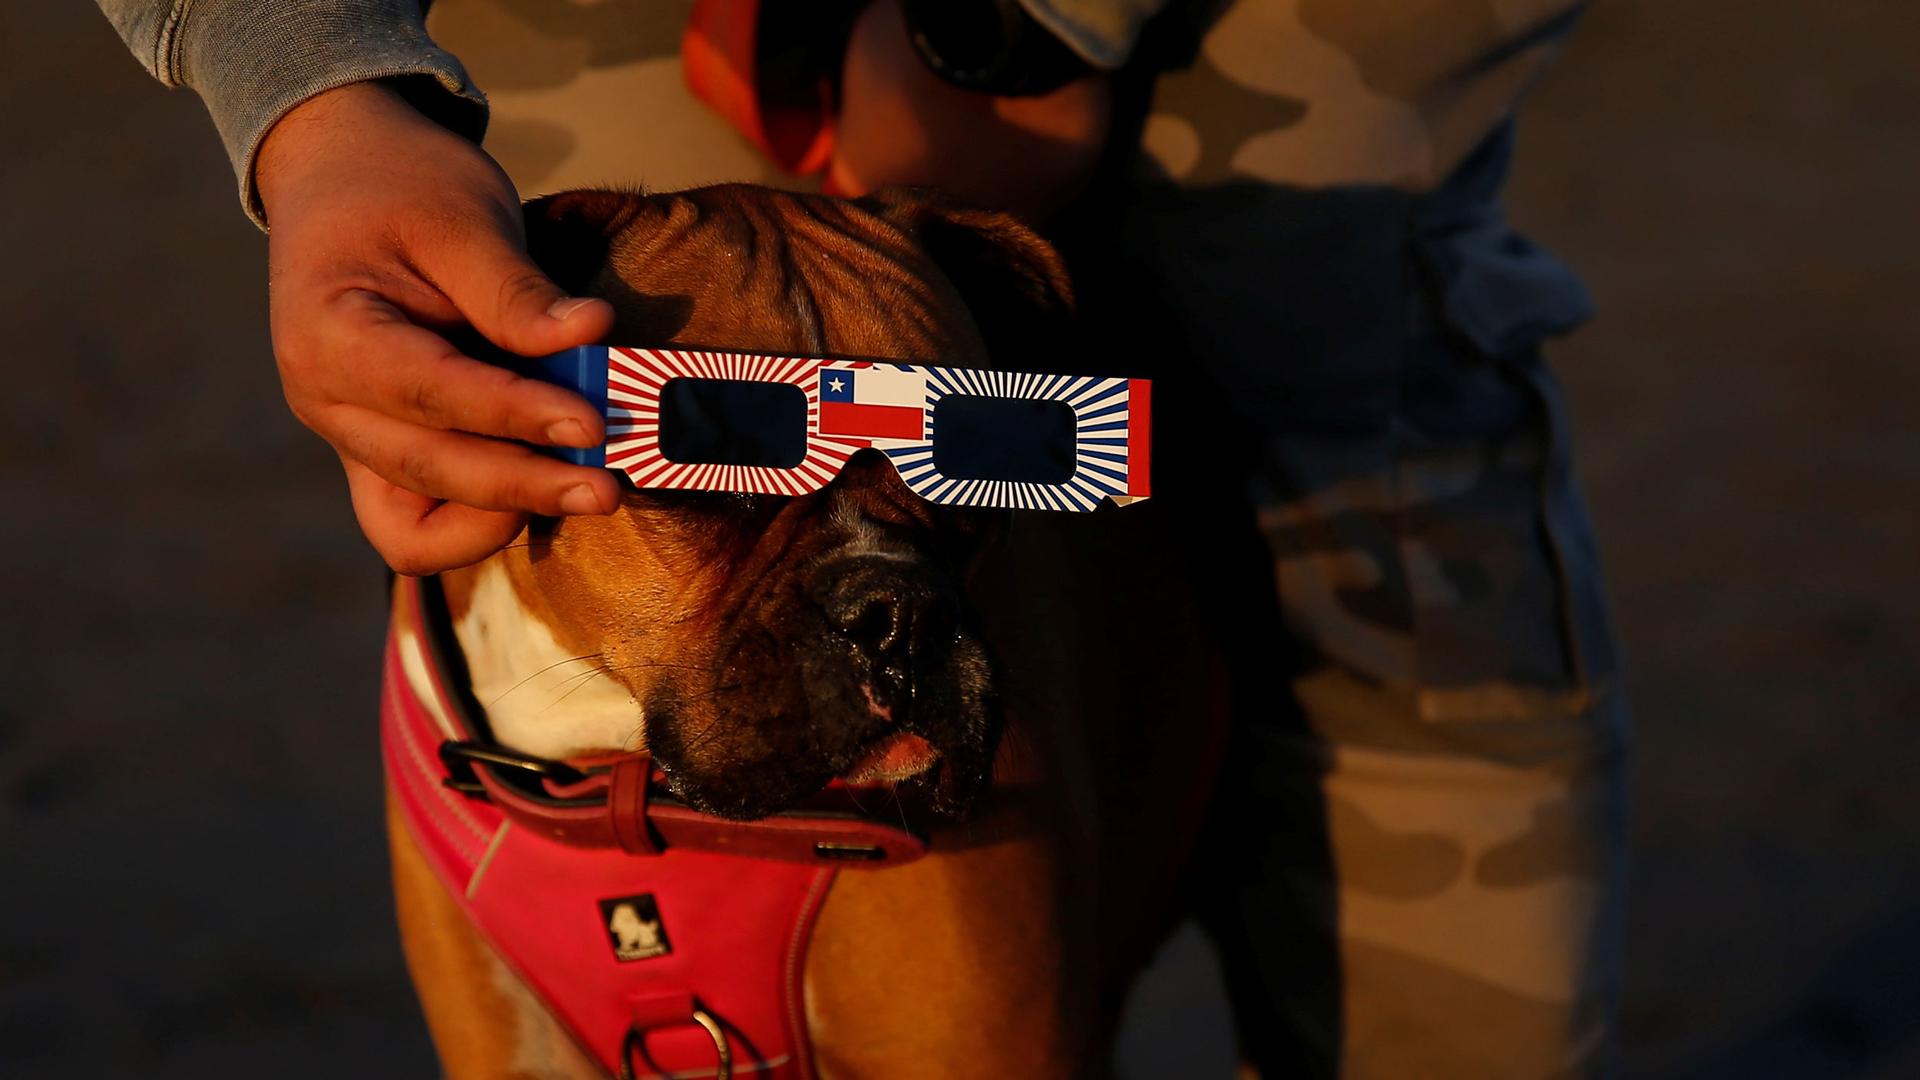 A dog is shown with paper solar esclipse glasses on held in place by a man on the side.